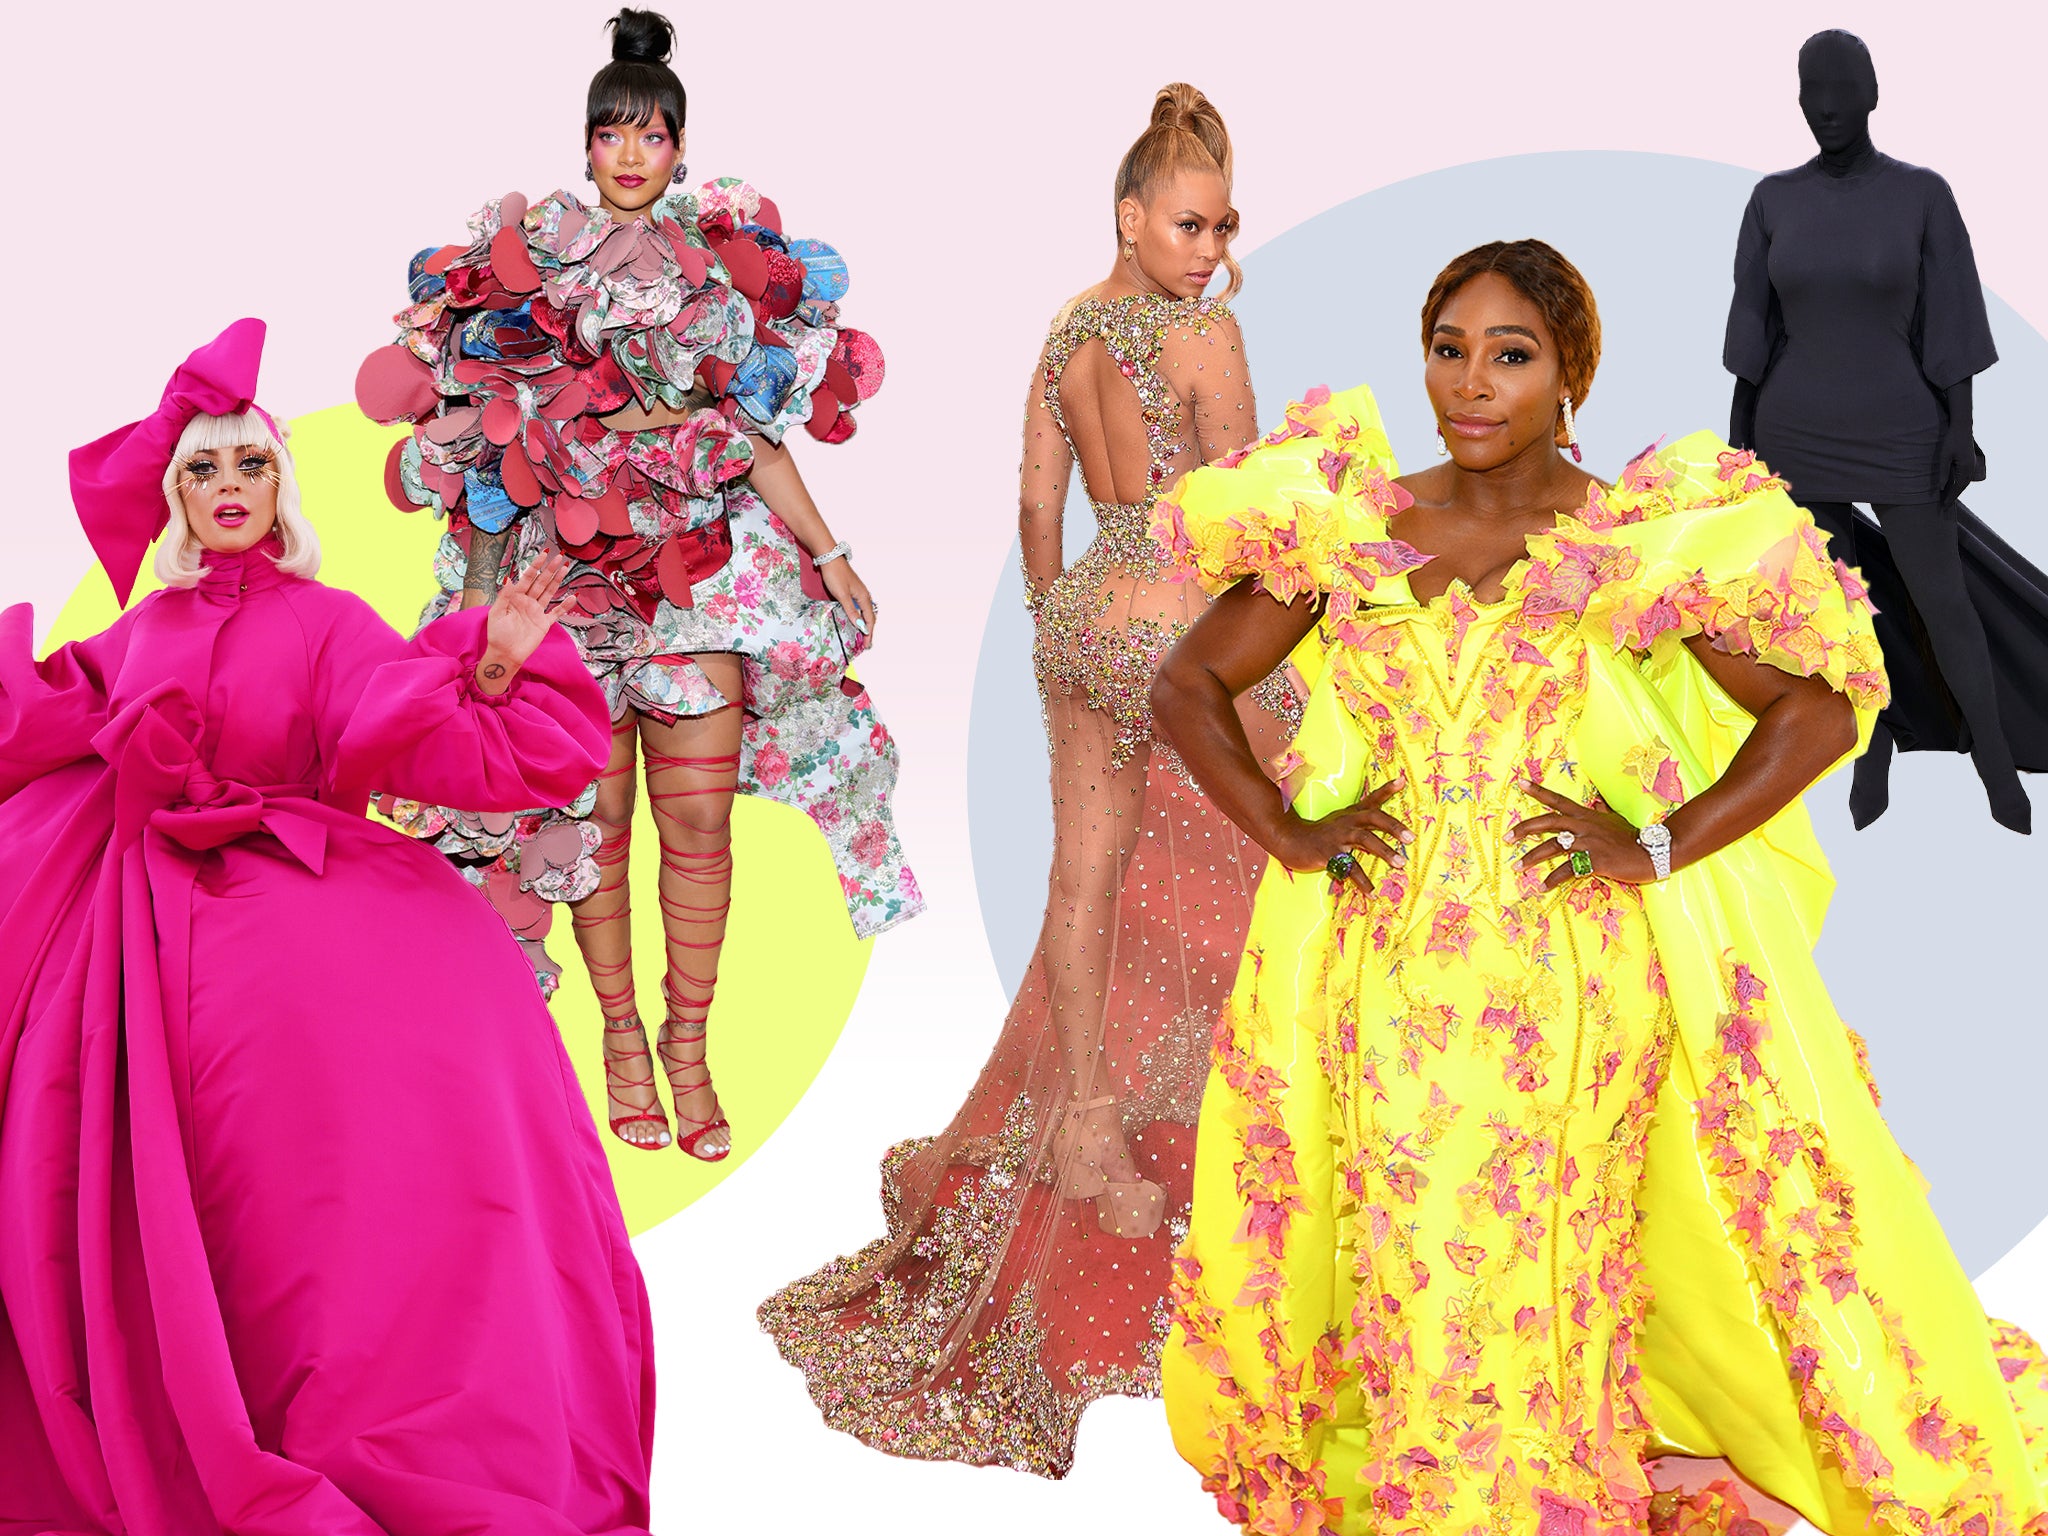 55 of the Best Met Gala Dresses of All Time - Met Gala Best Dressed,  Fashion Photos